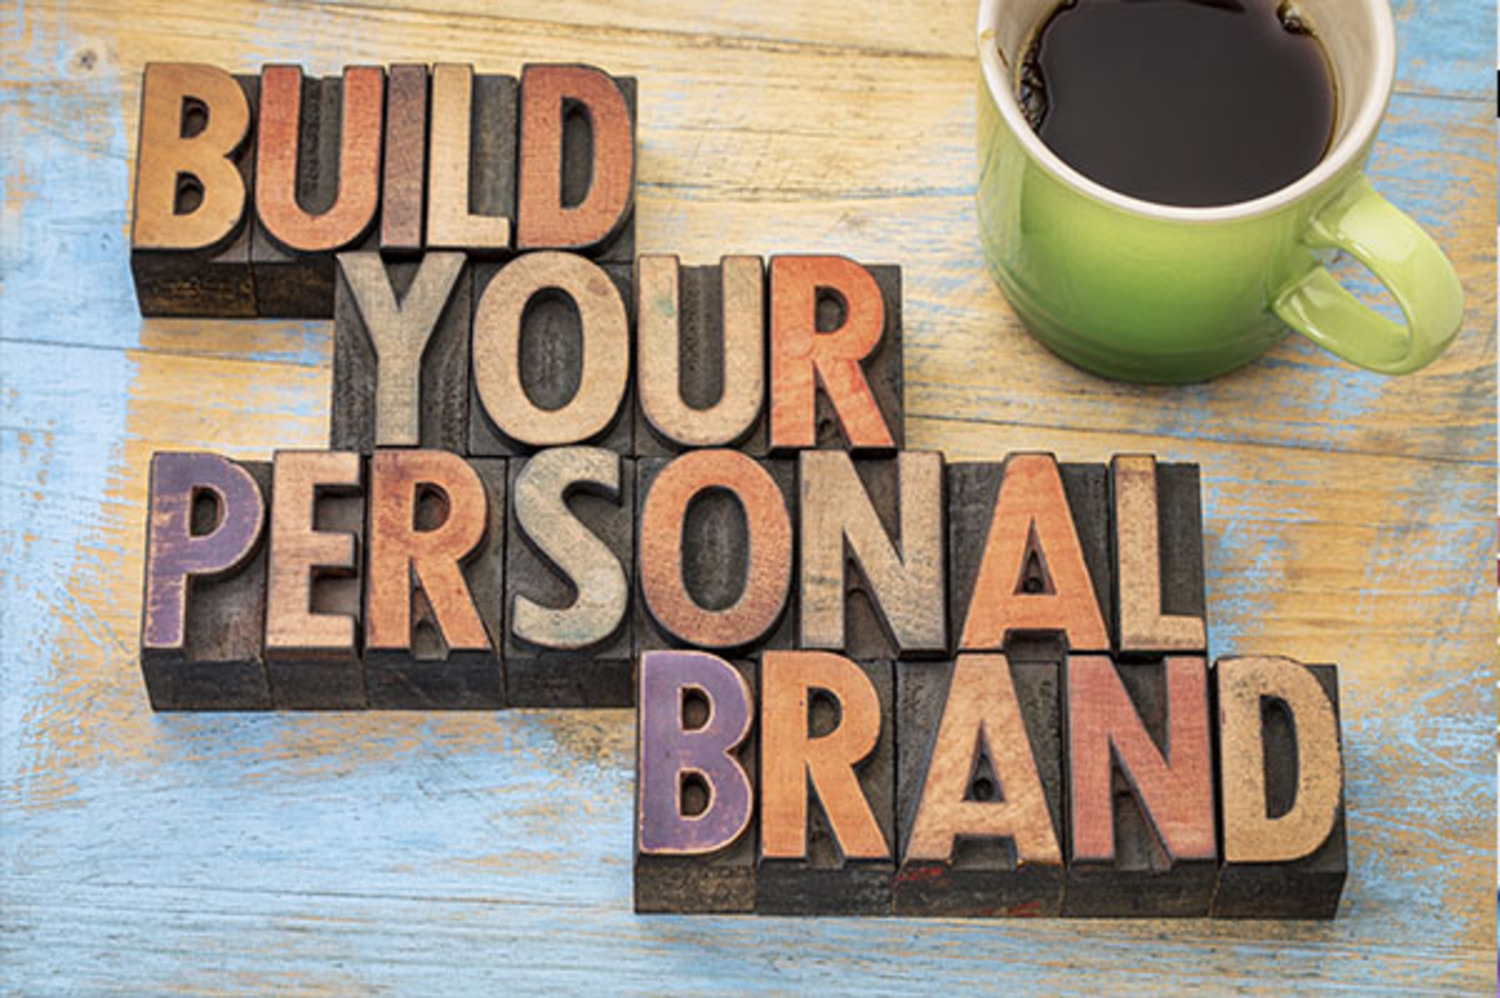 Build Your Personal Brand on bricks with coffee